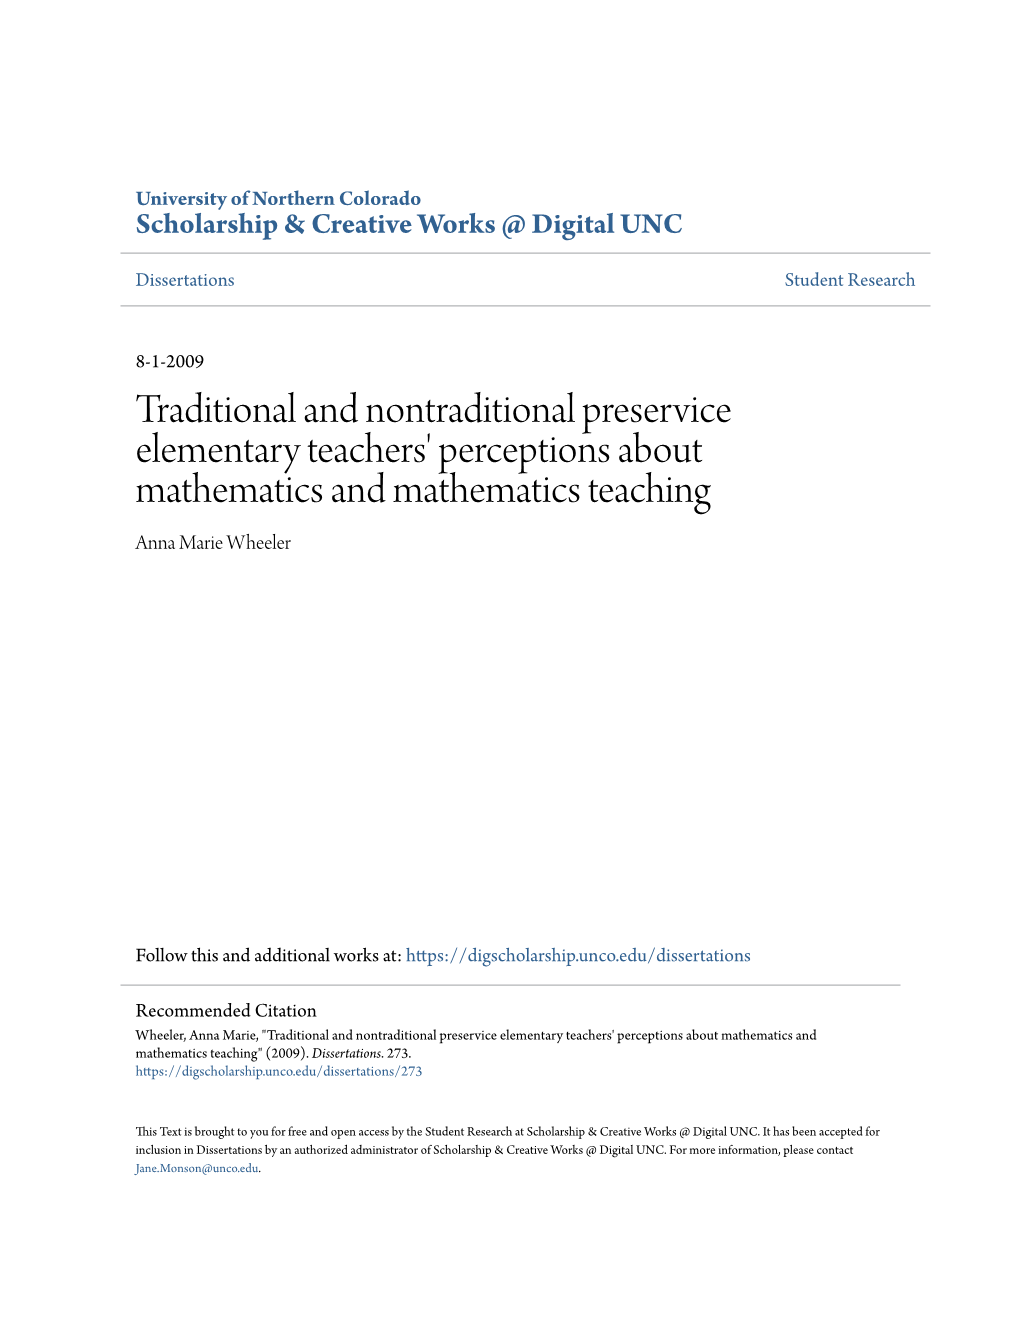 Traditional and Nontraditional Preservice Elementary Teachers' Perceptions About Mathematics and Mathematics Teaching Anna Marie Wheeler